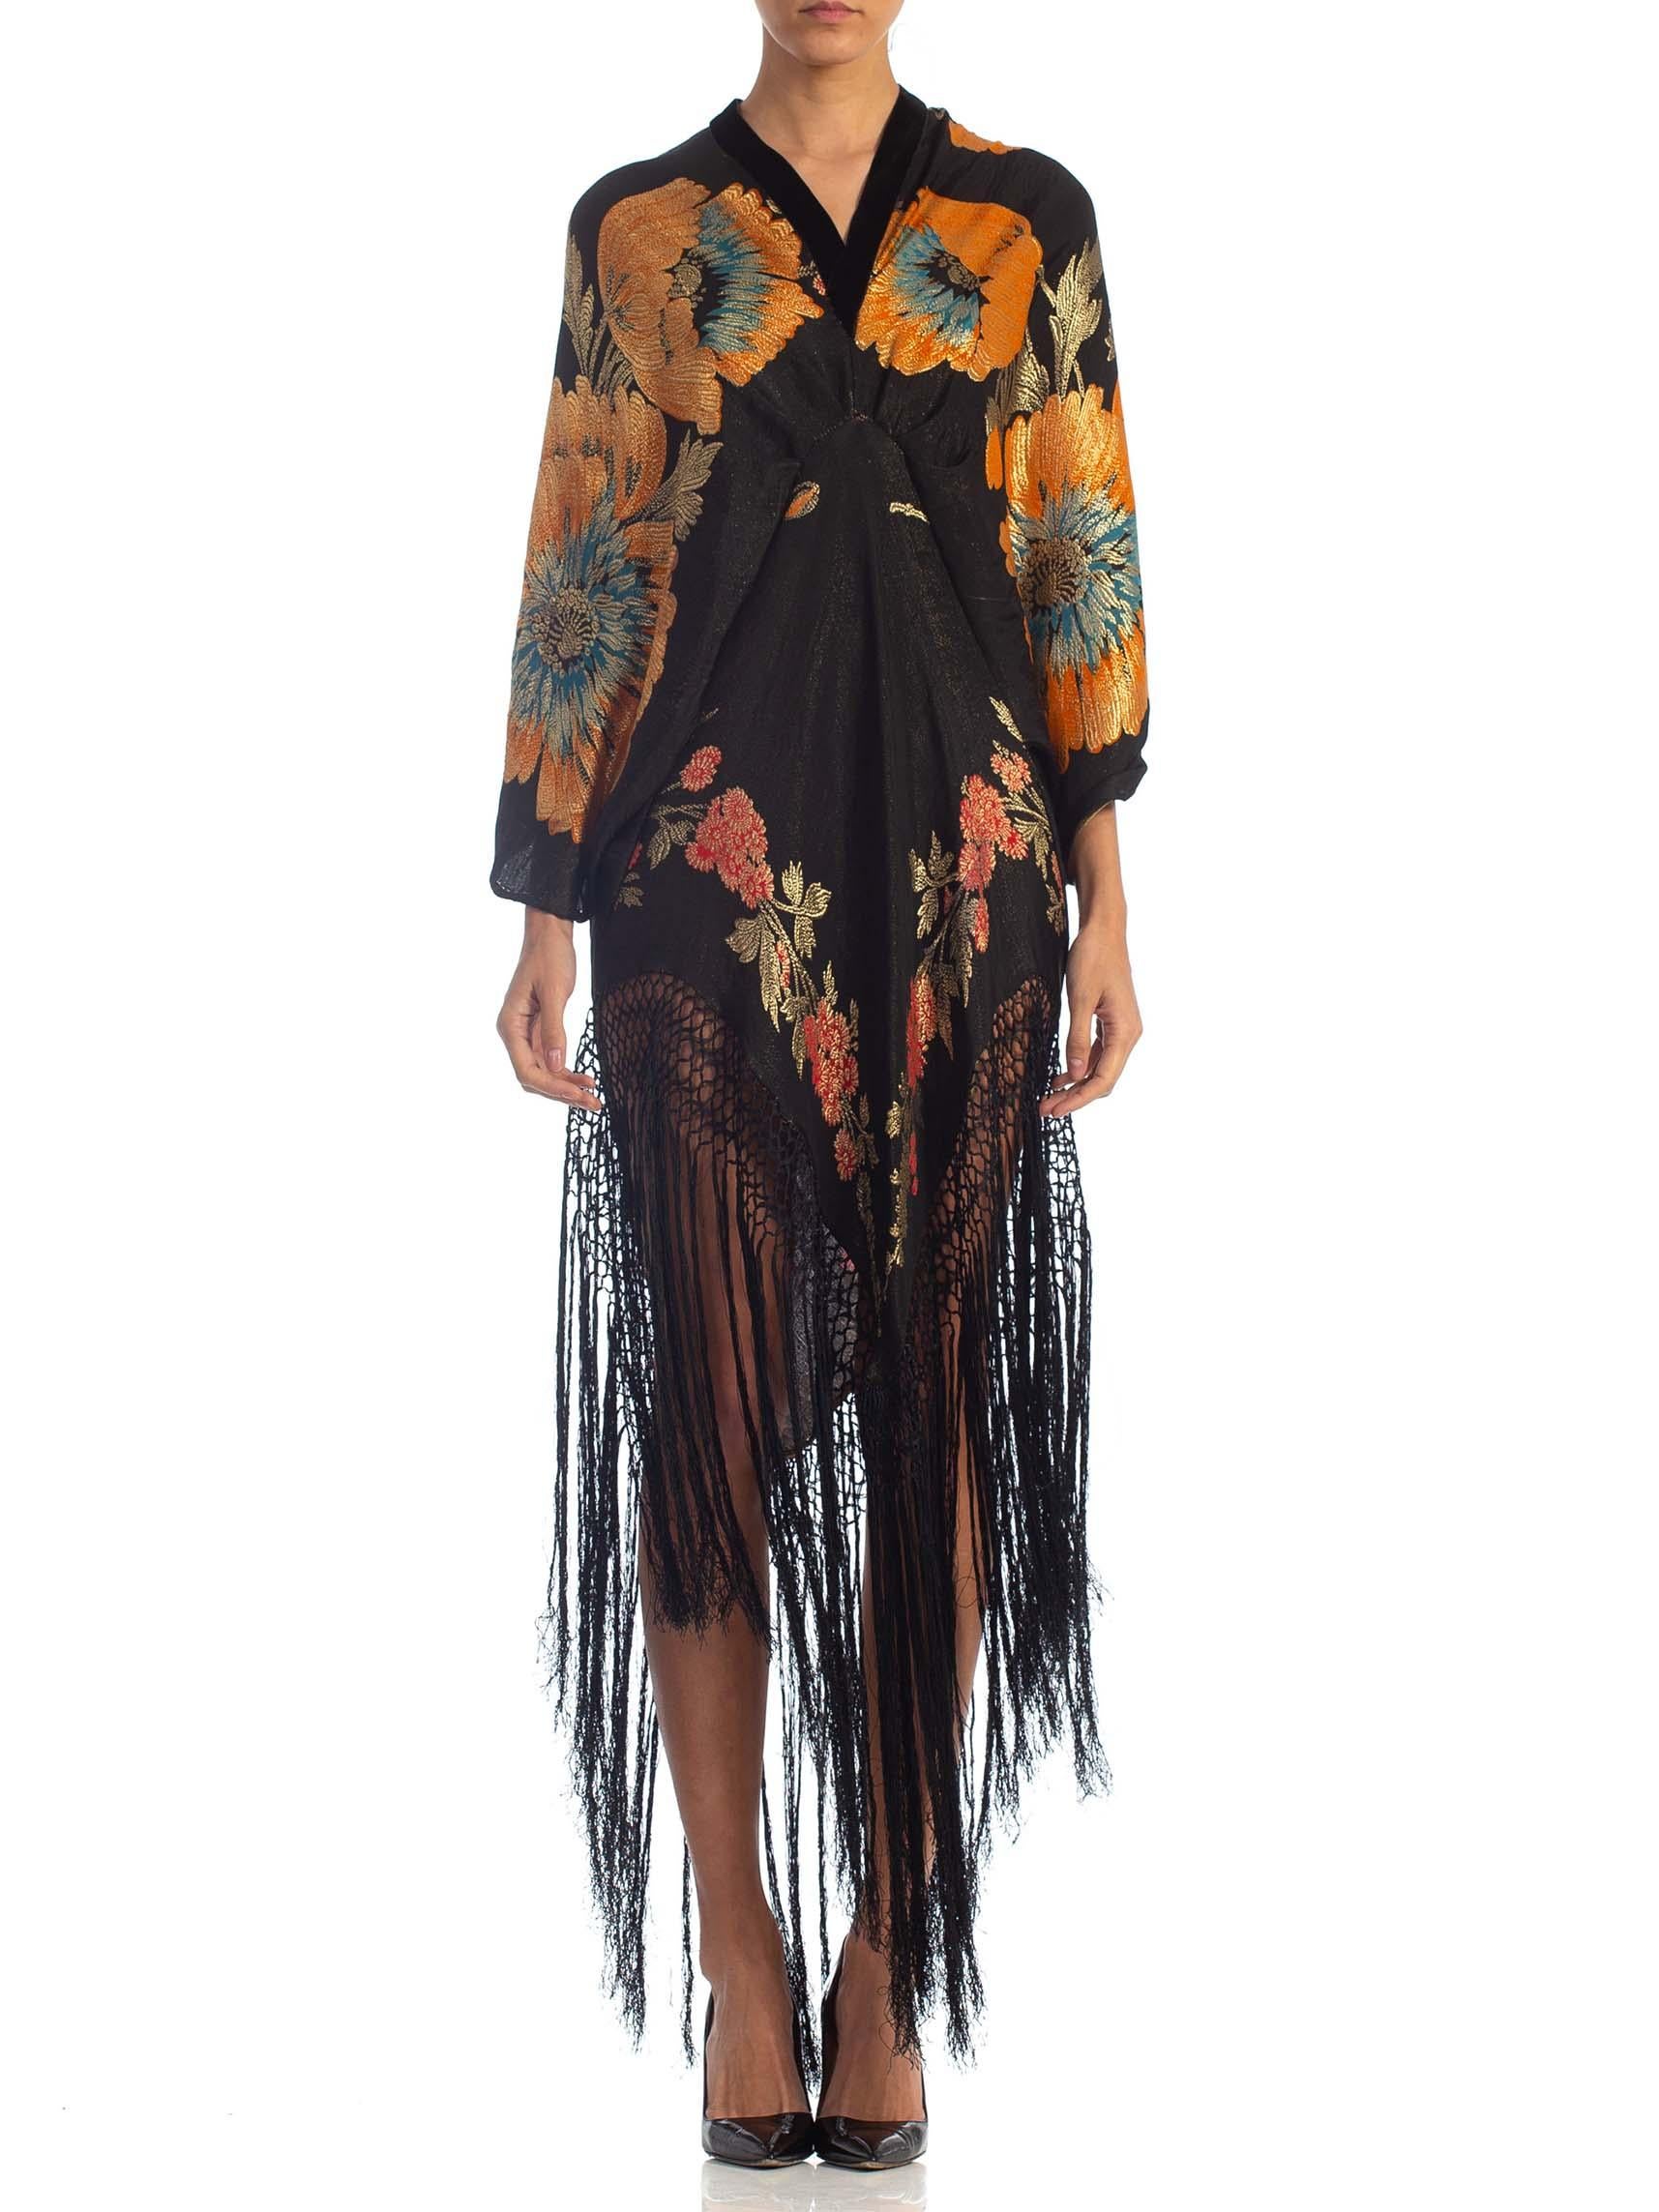 MORPHEW COLLECTION Floral Gold Lamé Silk Tunic Dress With Fringe
MORPHEW COLLECTION is made entirely by hand in our NYC Ateliér of rare antique materials sourced from around the globe. Our sustainable vintage materials represent over a century of